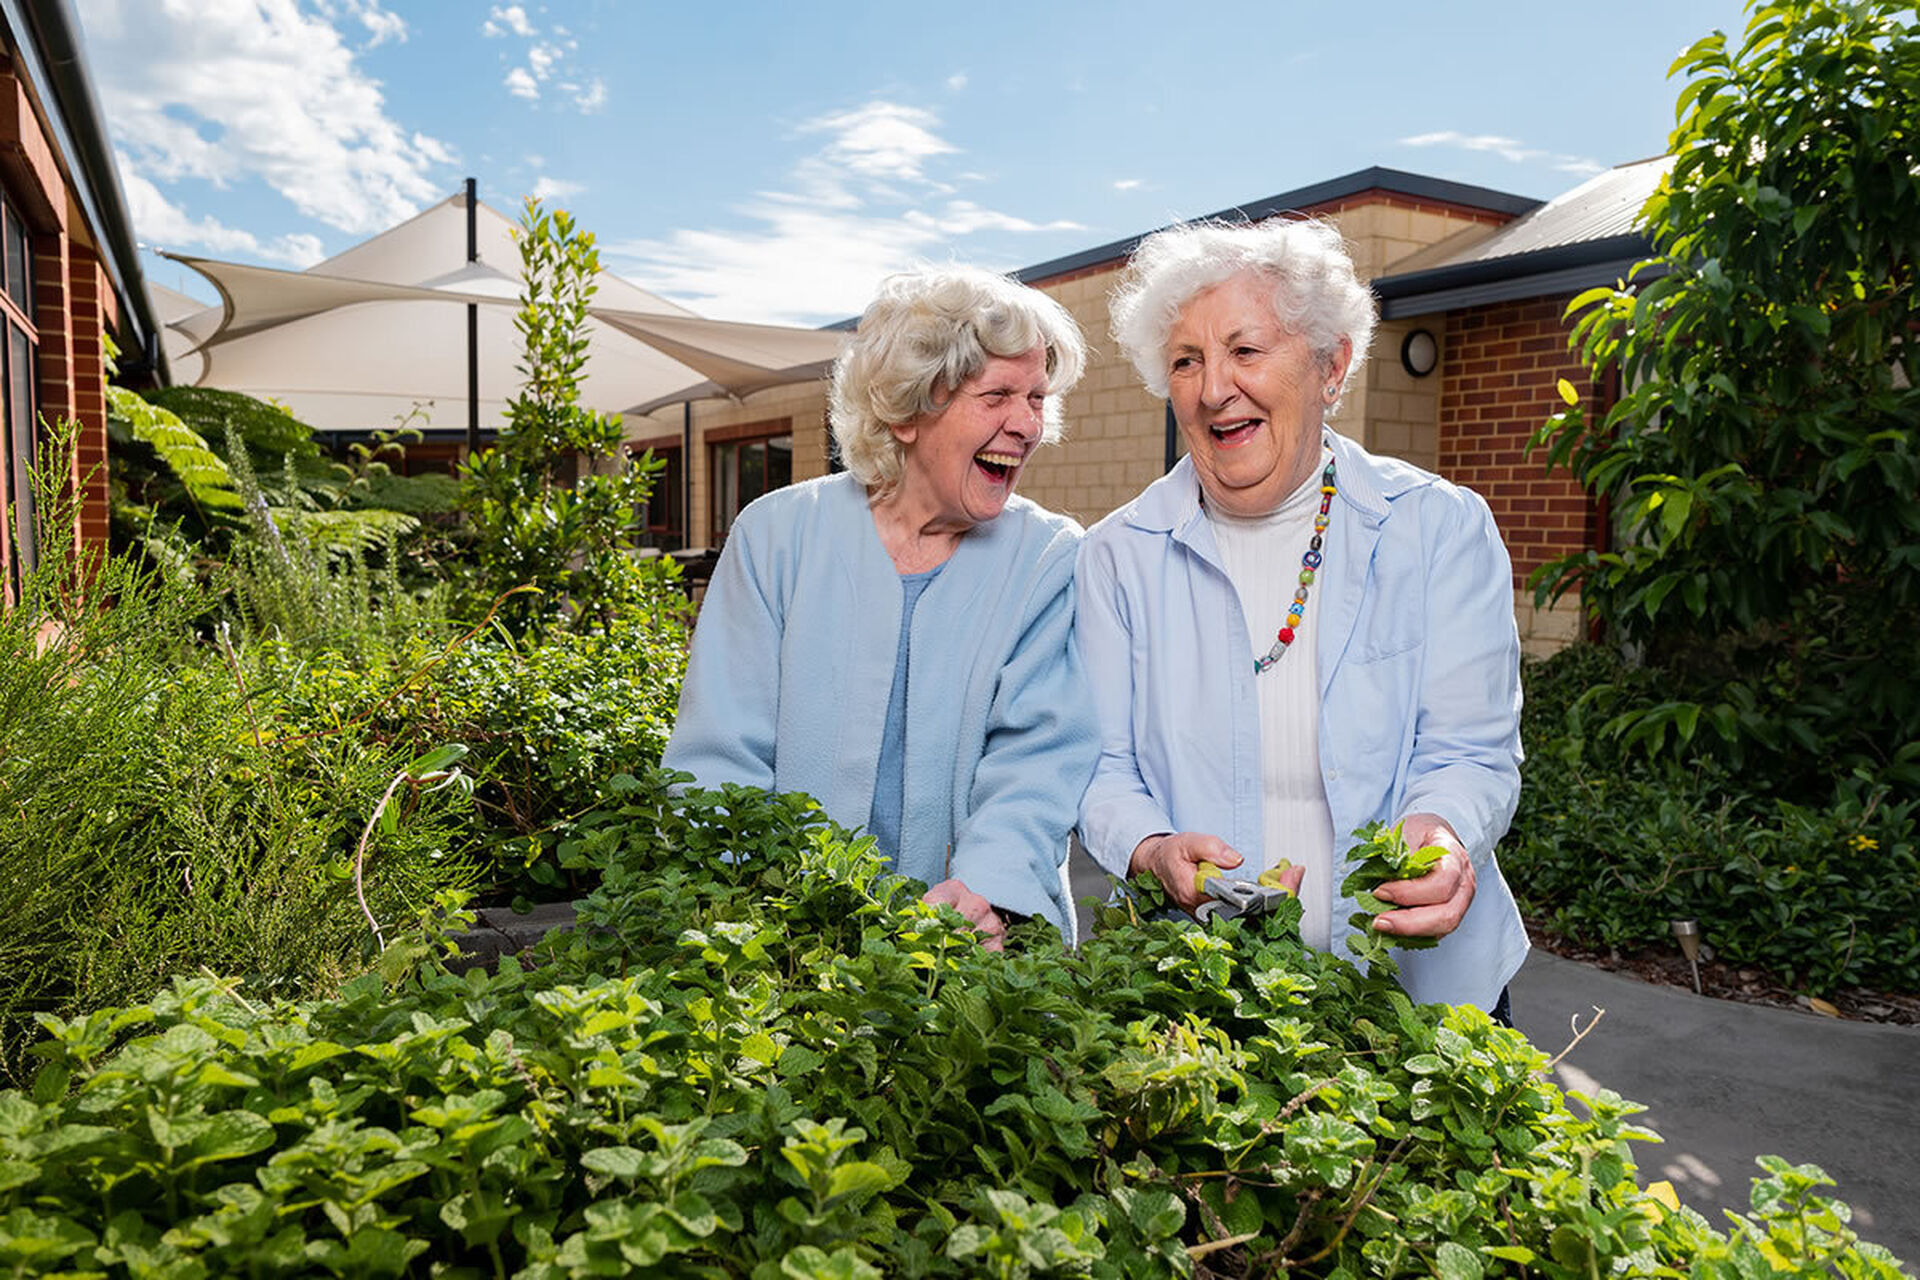 courtyard at baptistcare david buttfield centre aged care home in gwelup wa for nursing home residents to explore